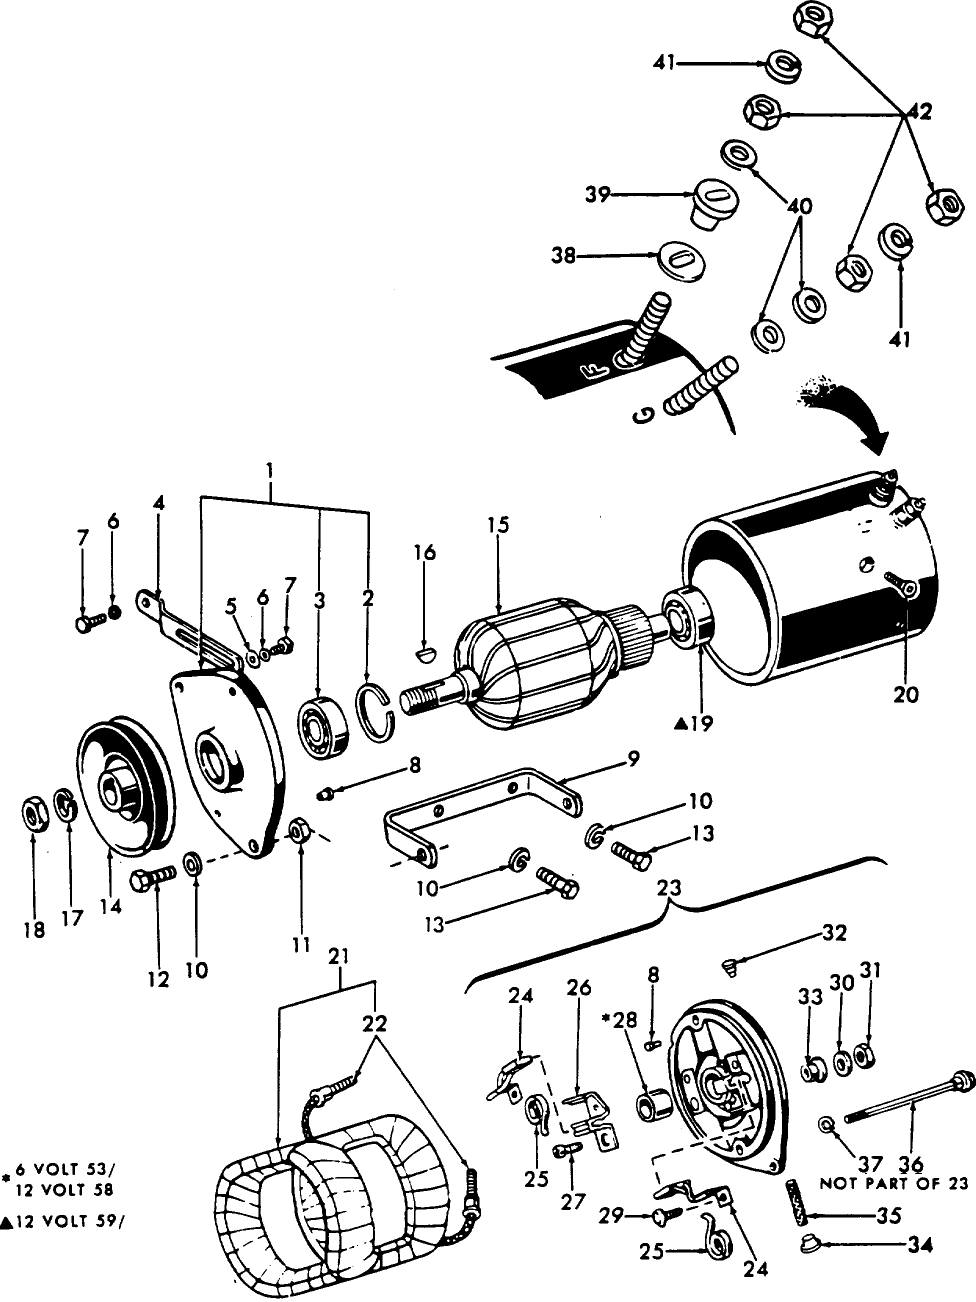 11B01 GENERATOR & RELATED PARTS